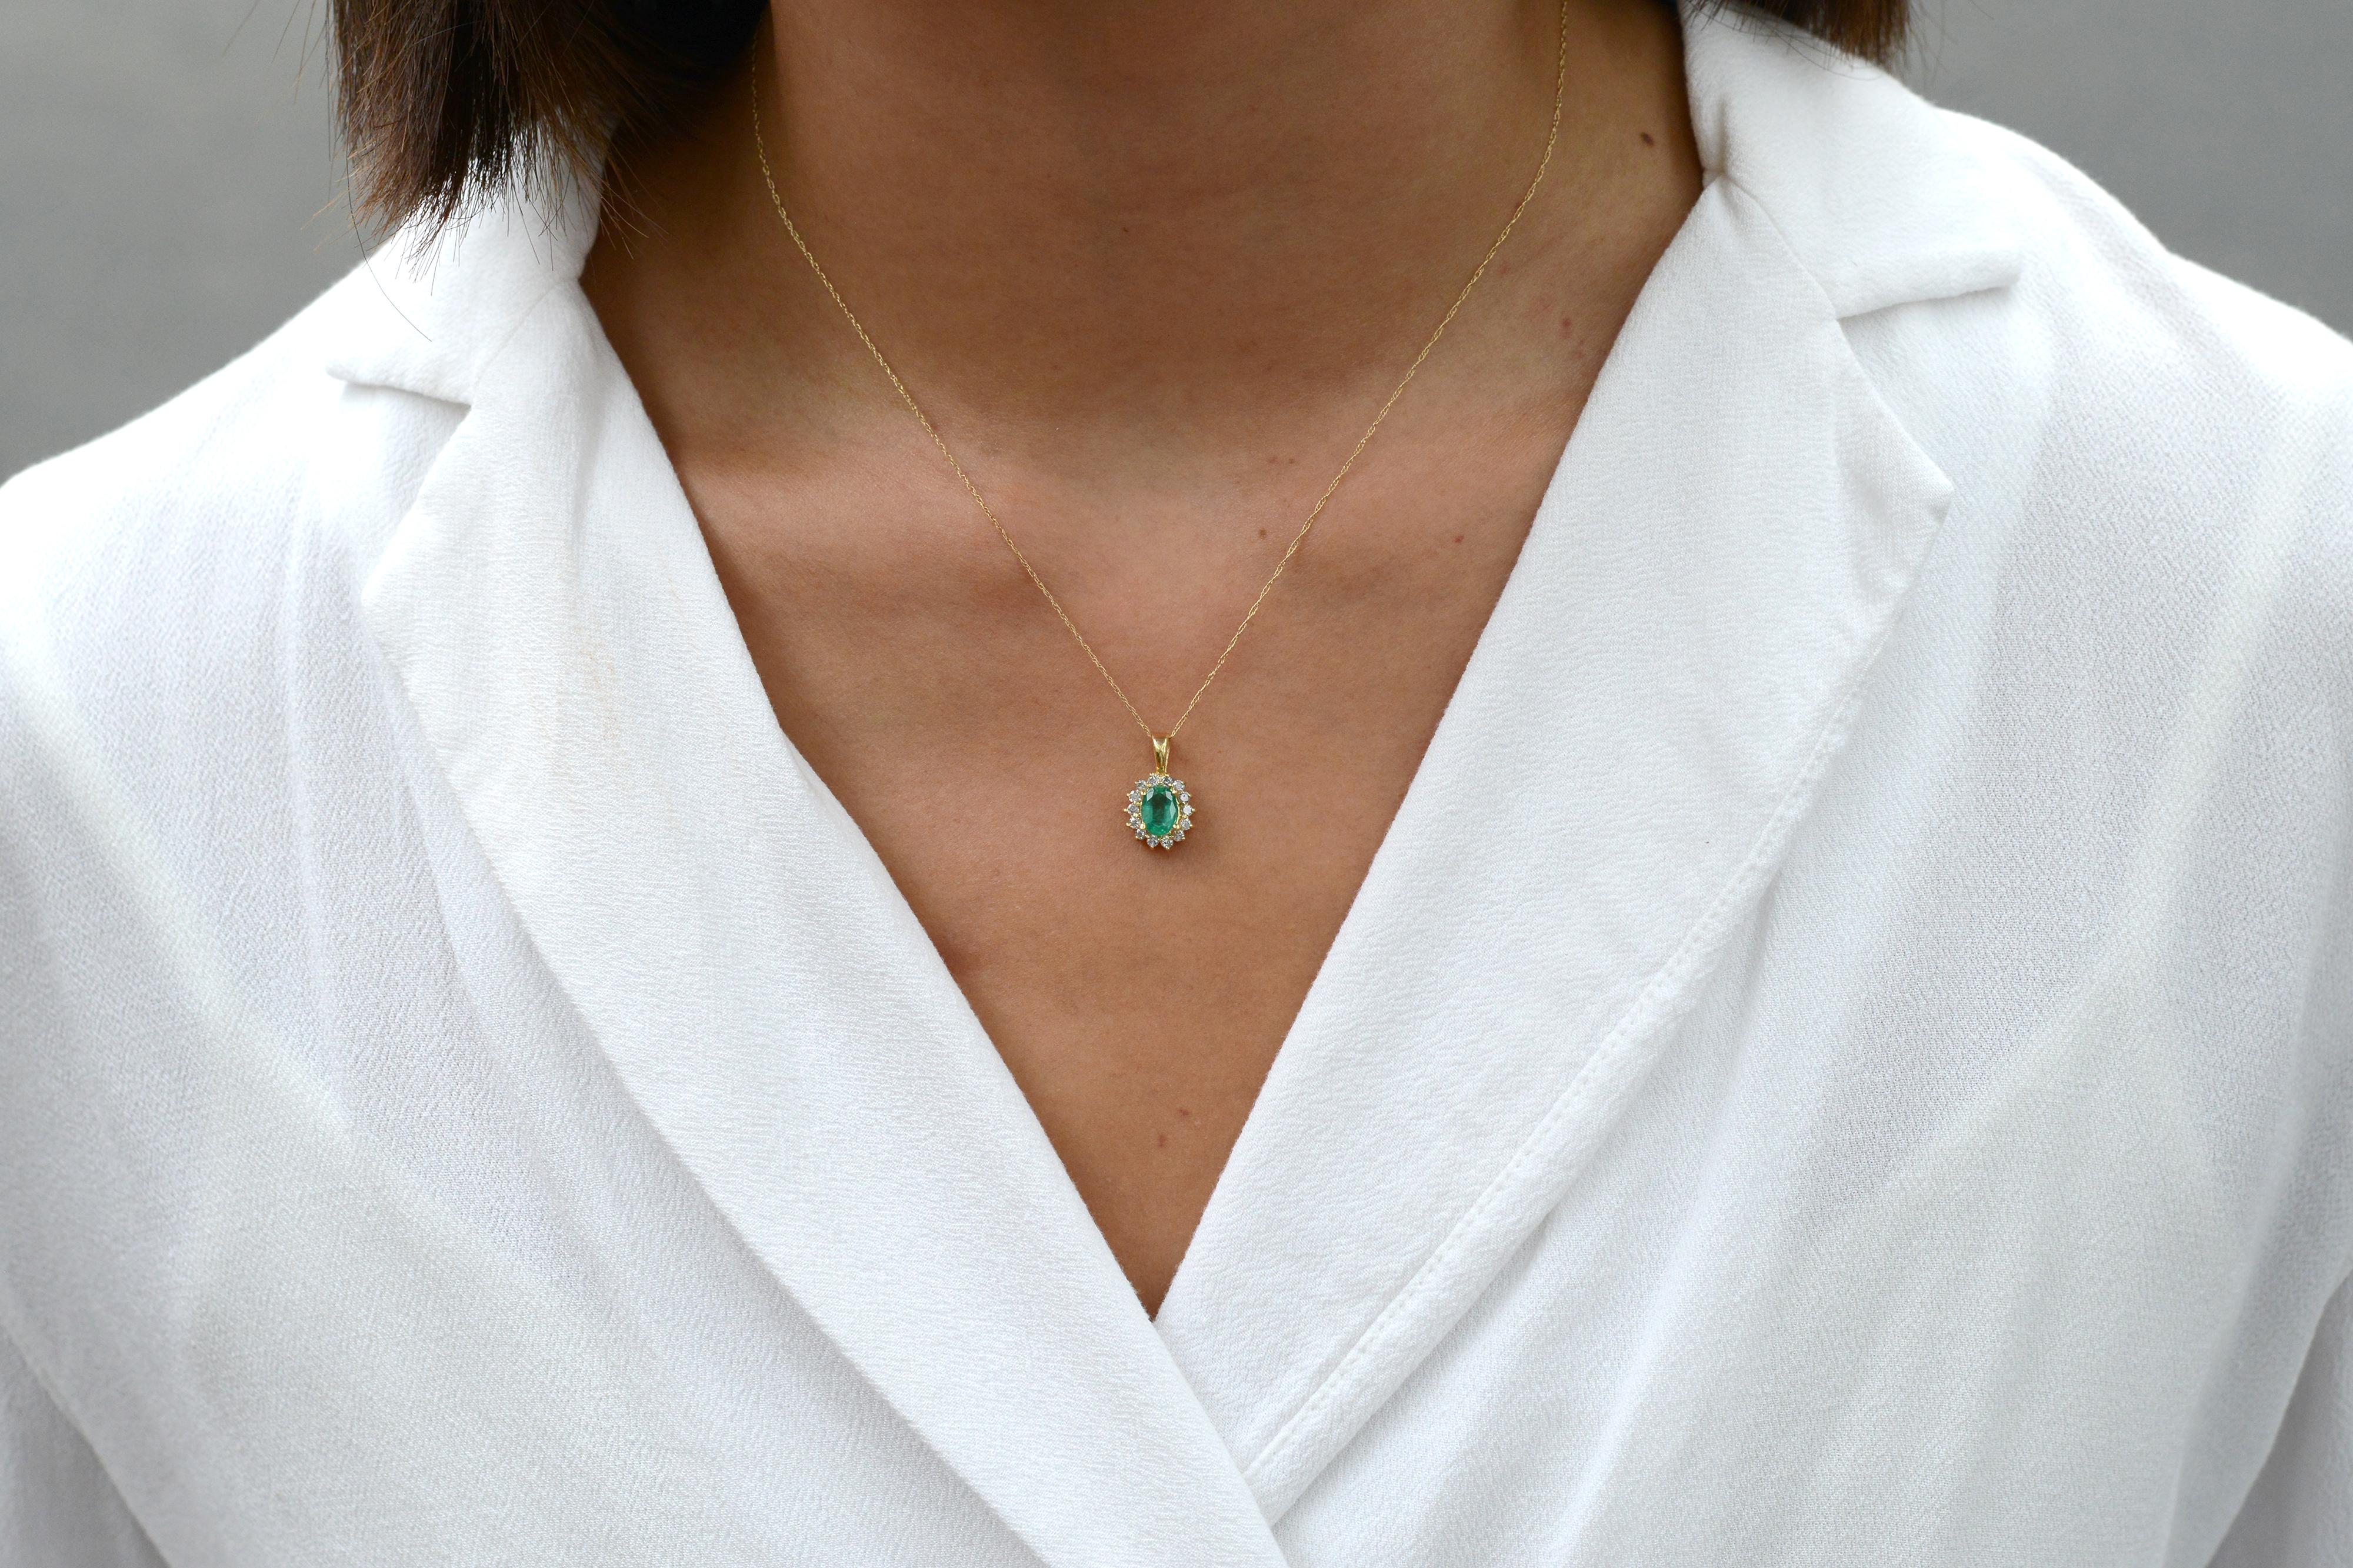 An affordable contemporary expression, this luxurious necklace is crafted with a lush, light green natural emerald, 14 karat yellow gold and a halo of sparkly and clear diamonds. The stunning pendant style necklace presents a delicate complexity